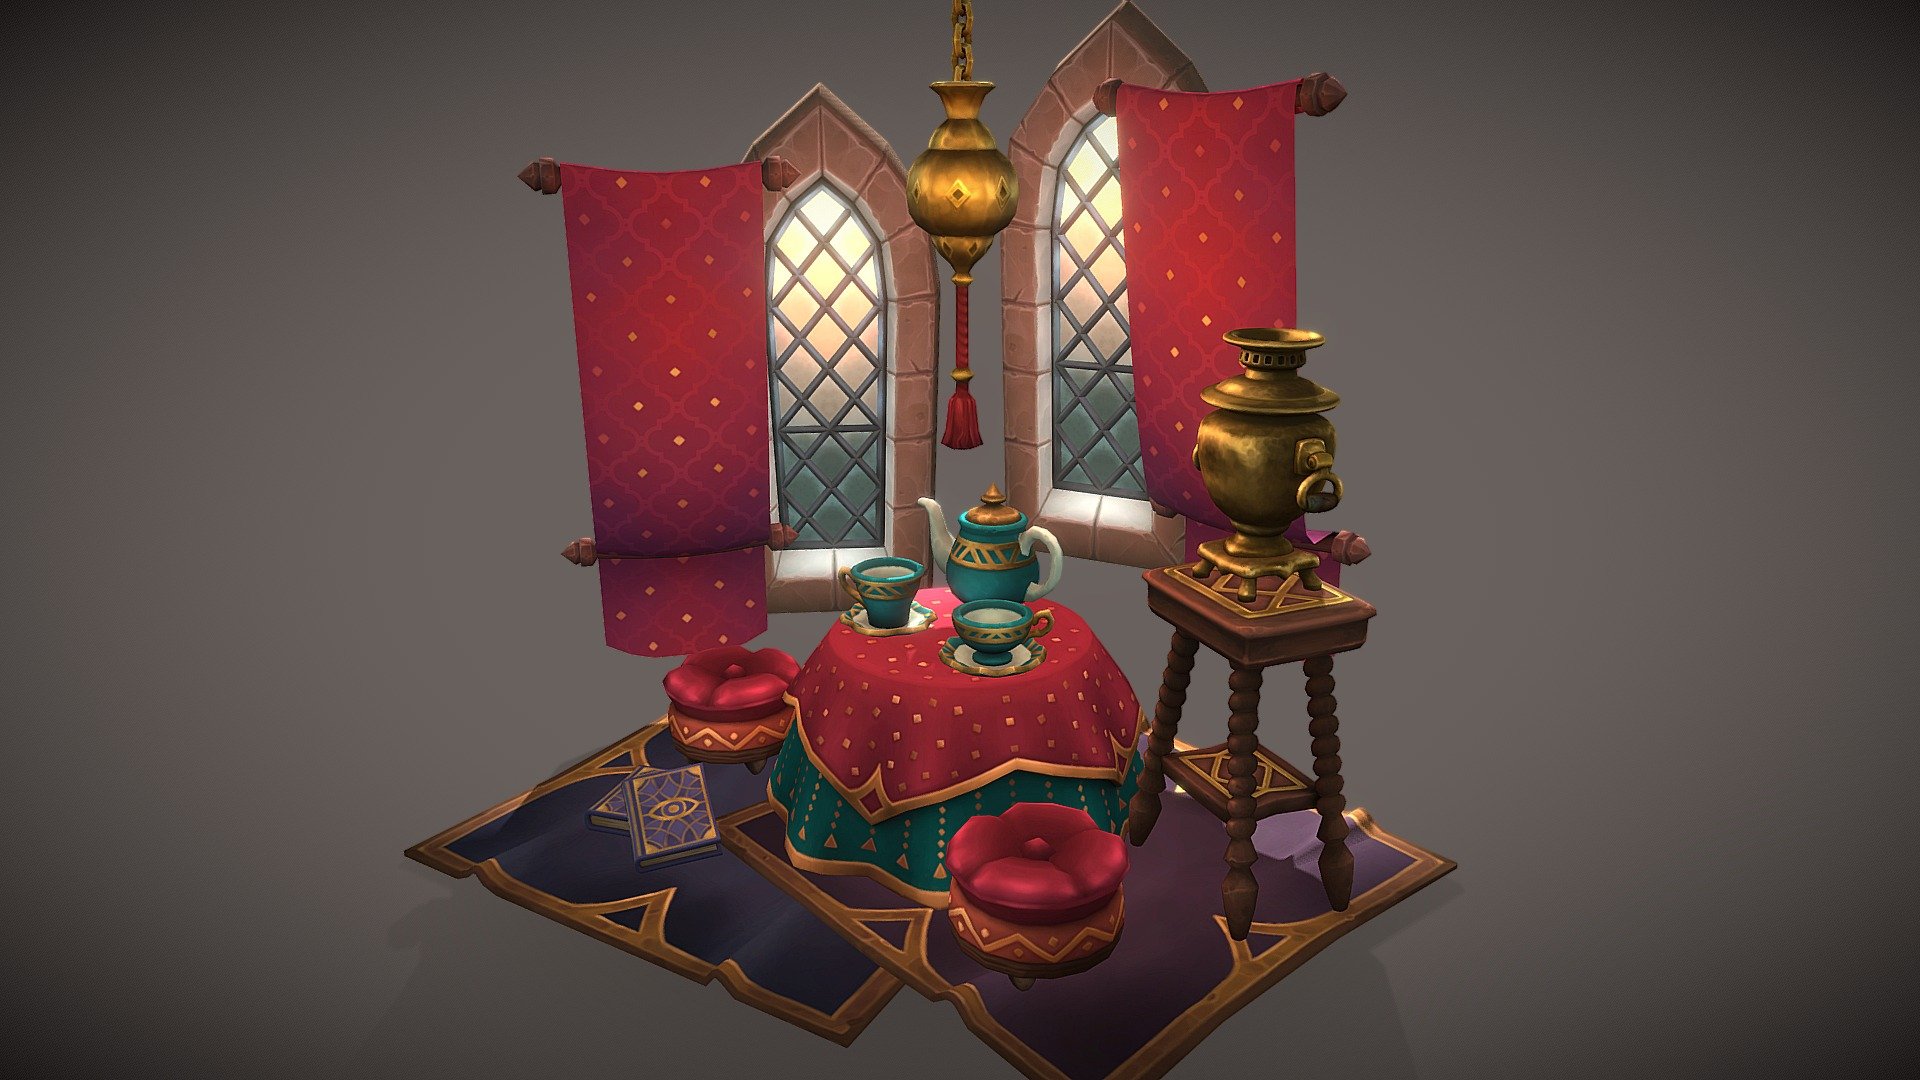 An early morning class of Divination up at the north tower of Hogwarts Castle teaching Tessomancy - the art of reading tea leaves to predict the events in the future!

A Harry Potter fan art of the exotic Divination classroom. It was really fun and challenging hand-painting the metal materials!

Modelled in Blender, texture painted in 3D Coat and Photoshop 3d model